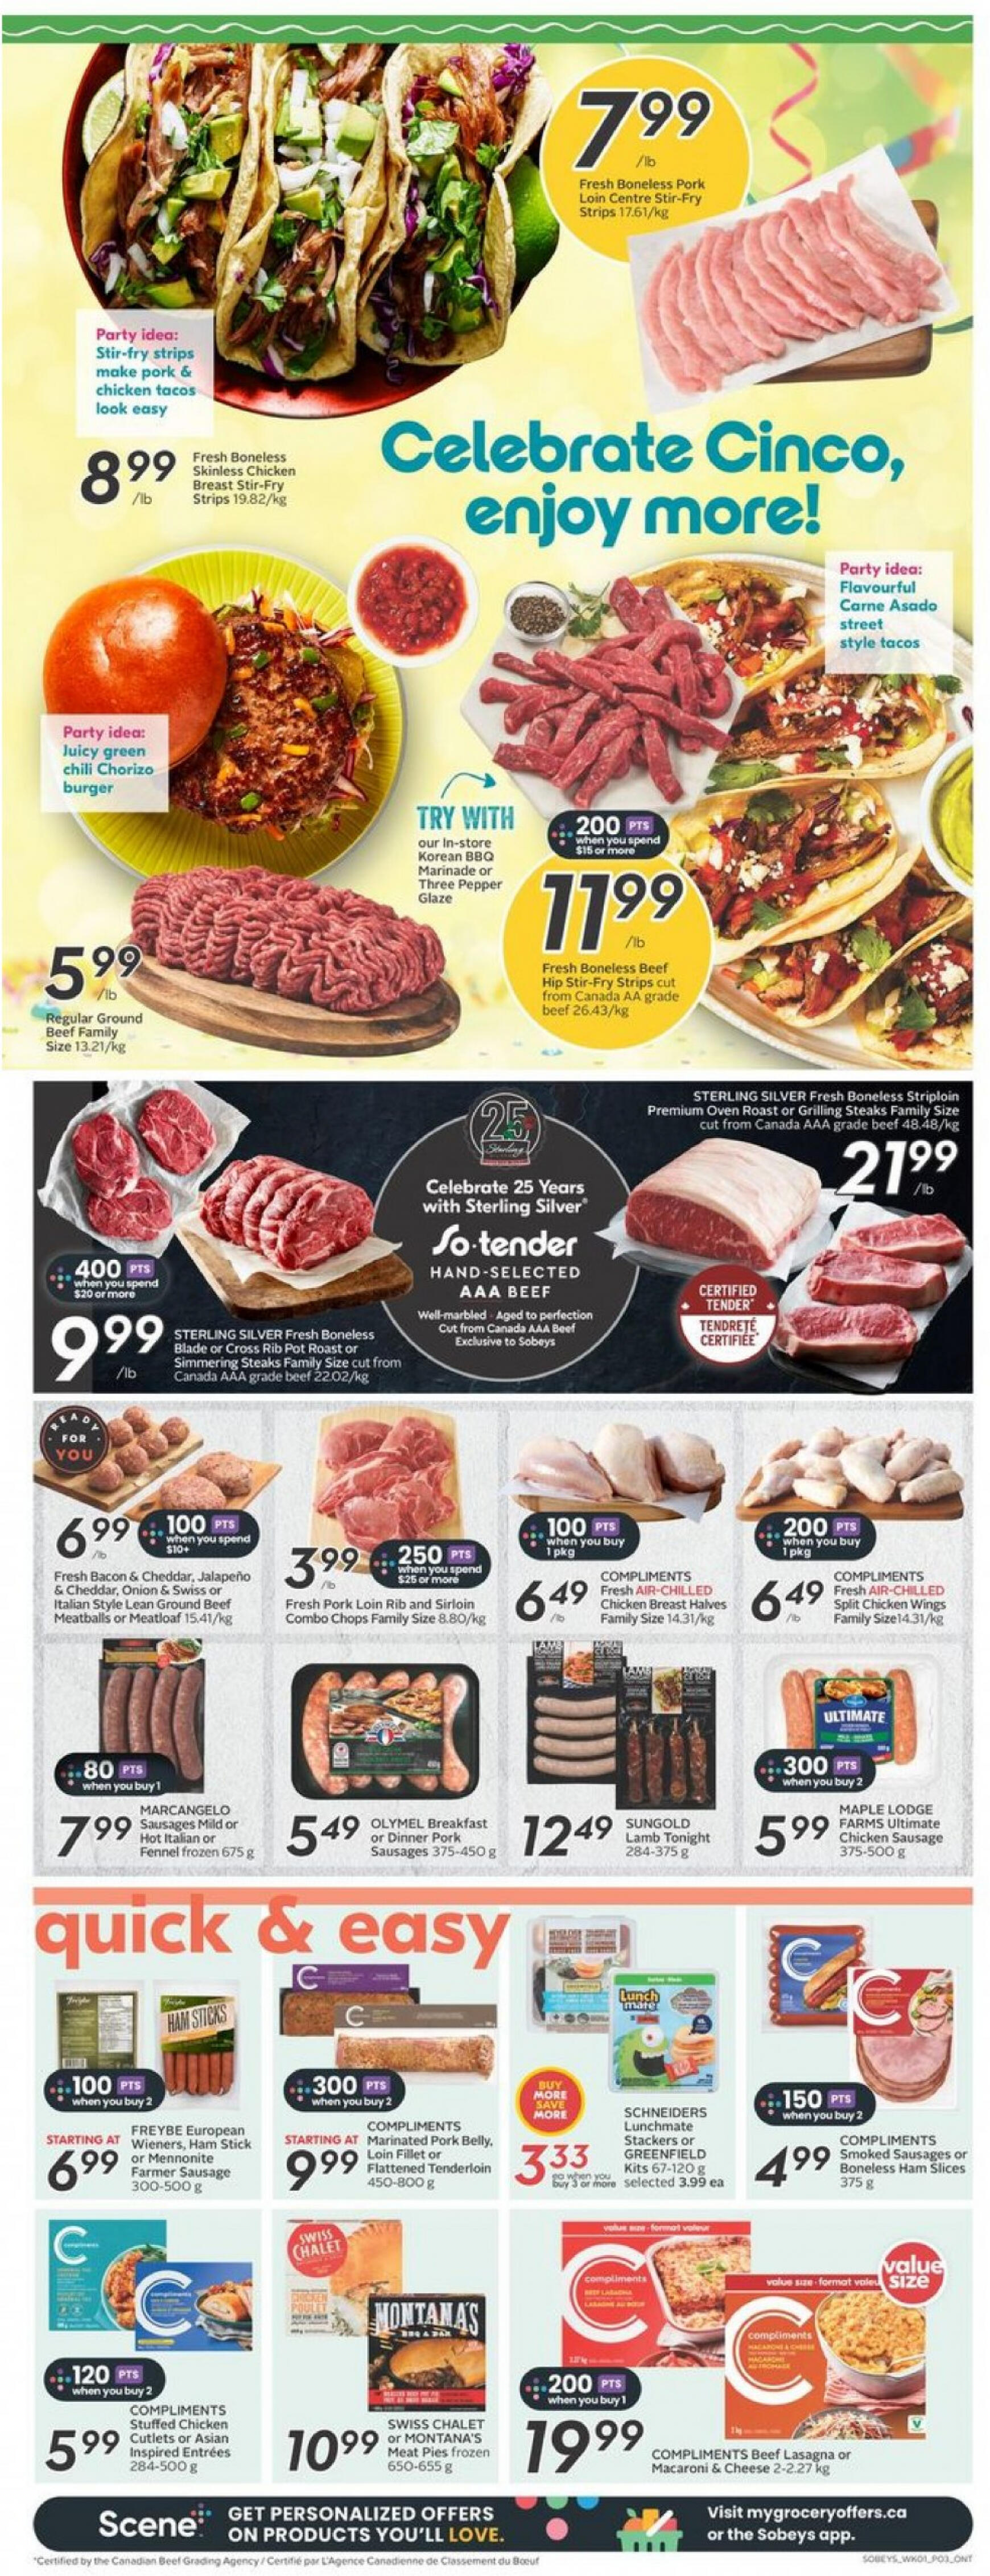 sobeys - Sobeys - Weekly Flyer - Ontario flyer current 02.05. - 08.05. - page: 7